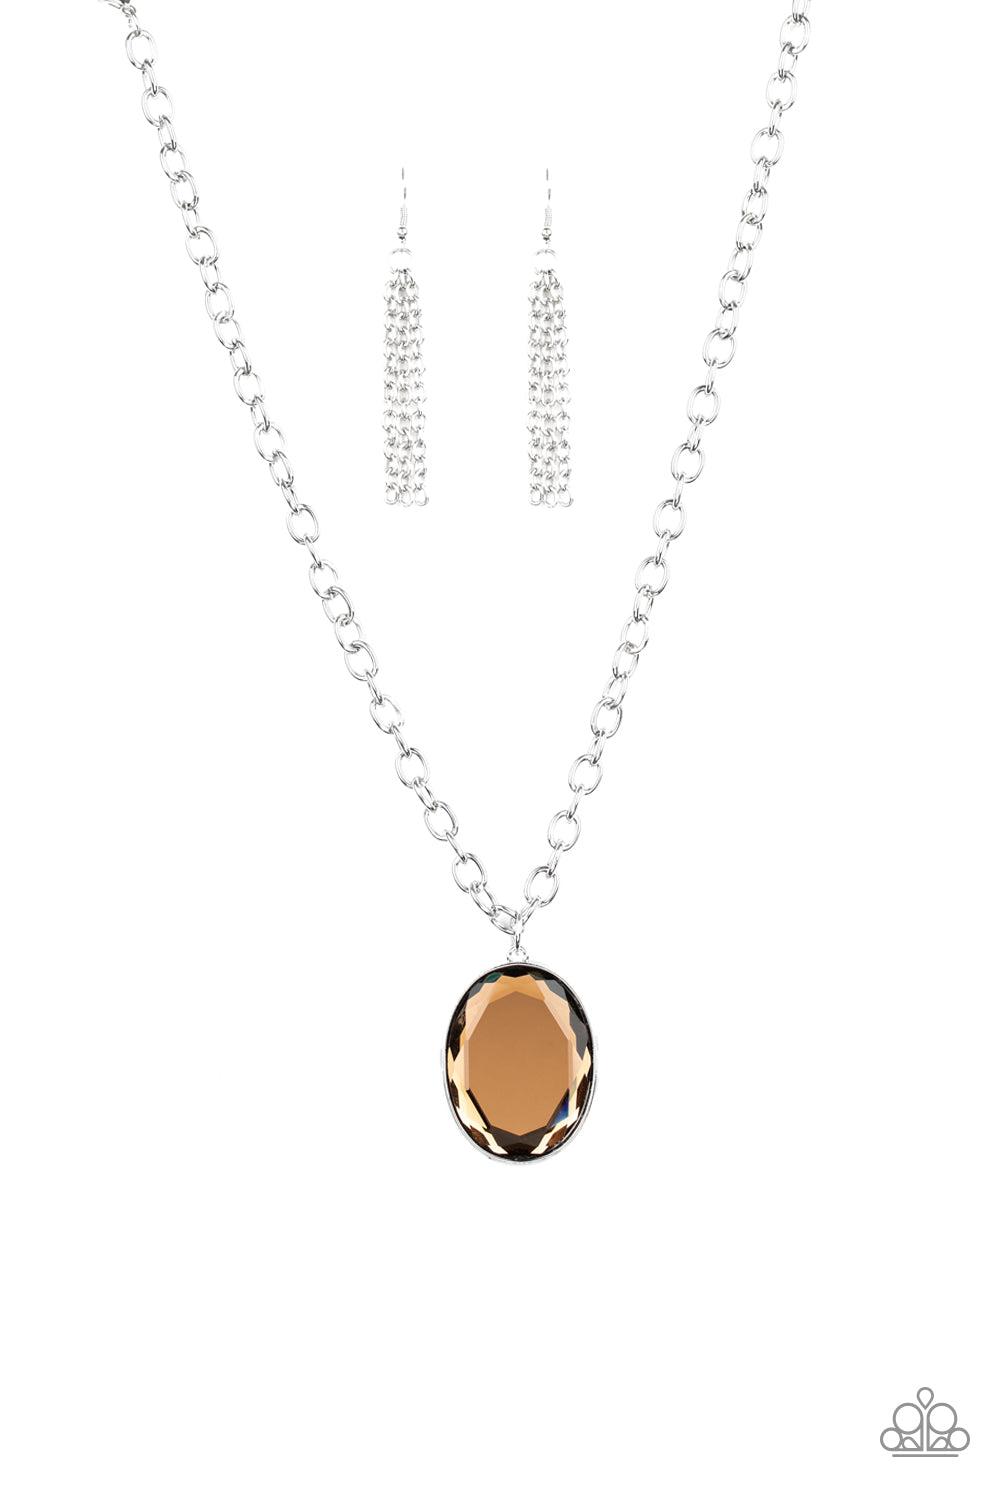 Light As HEIR - Brown Necklace